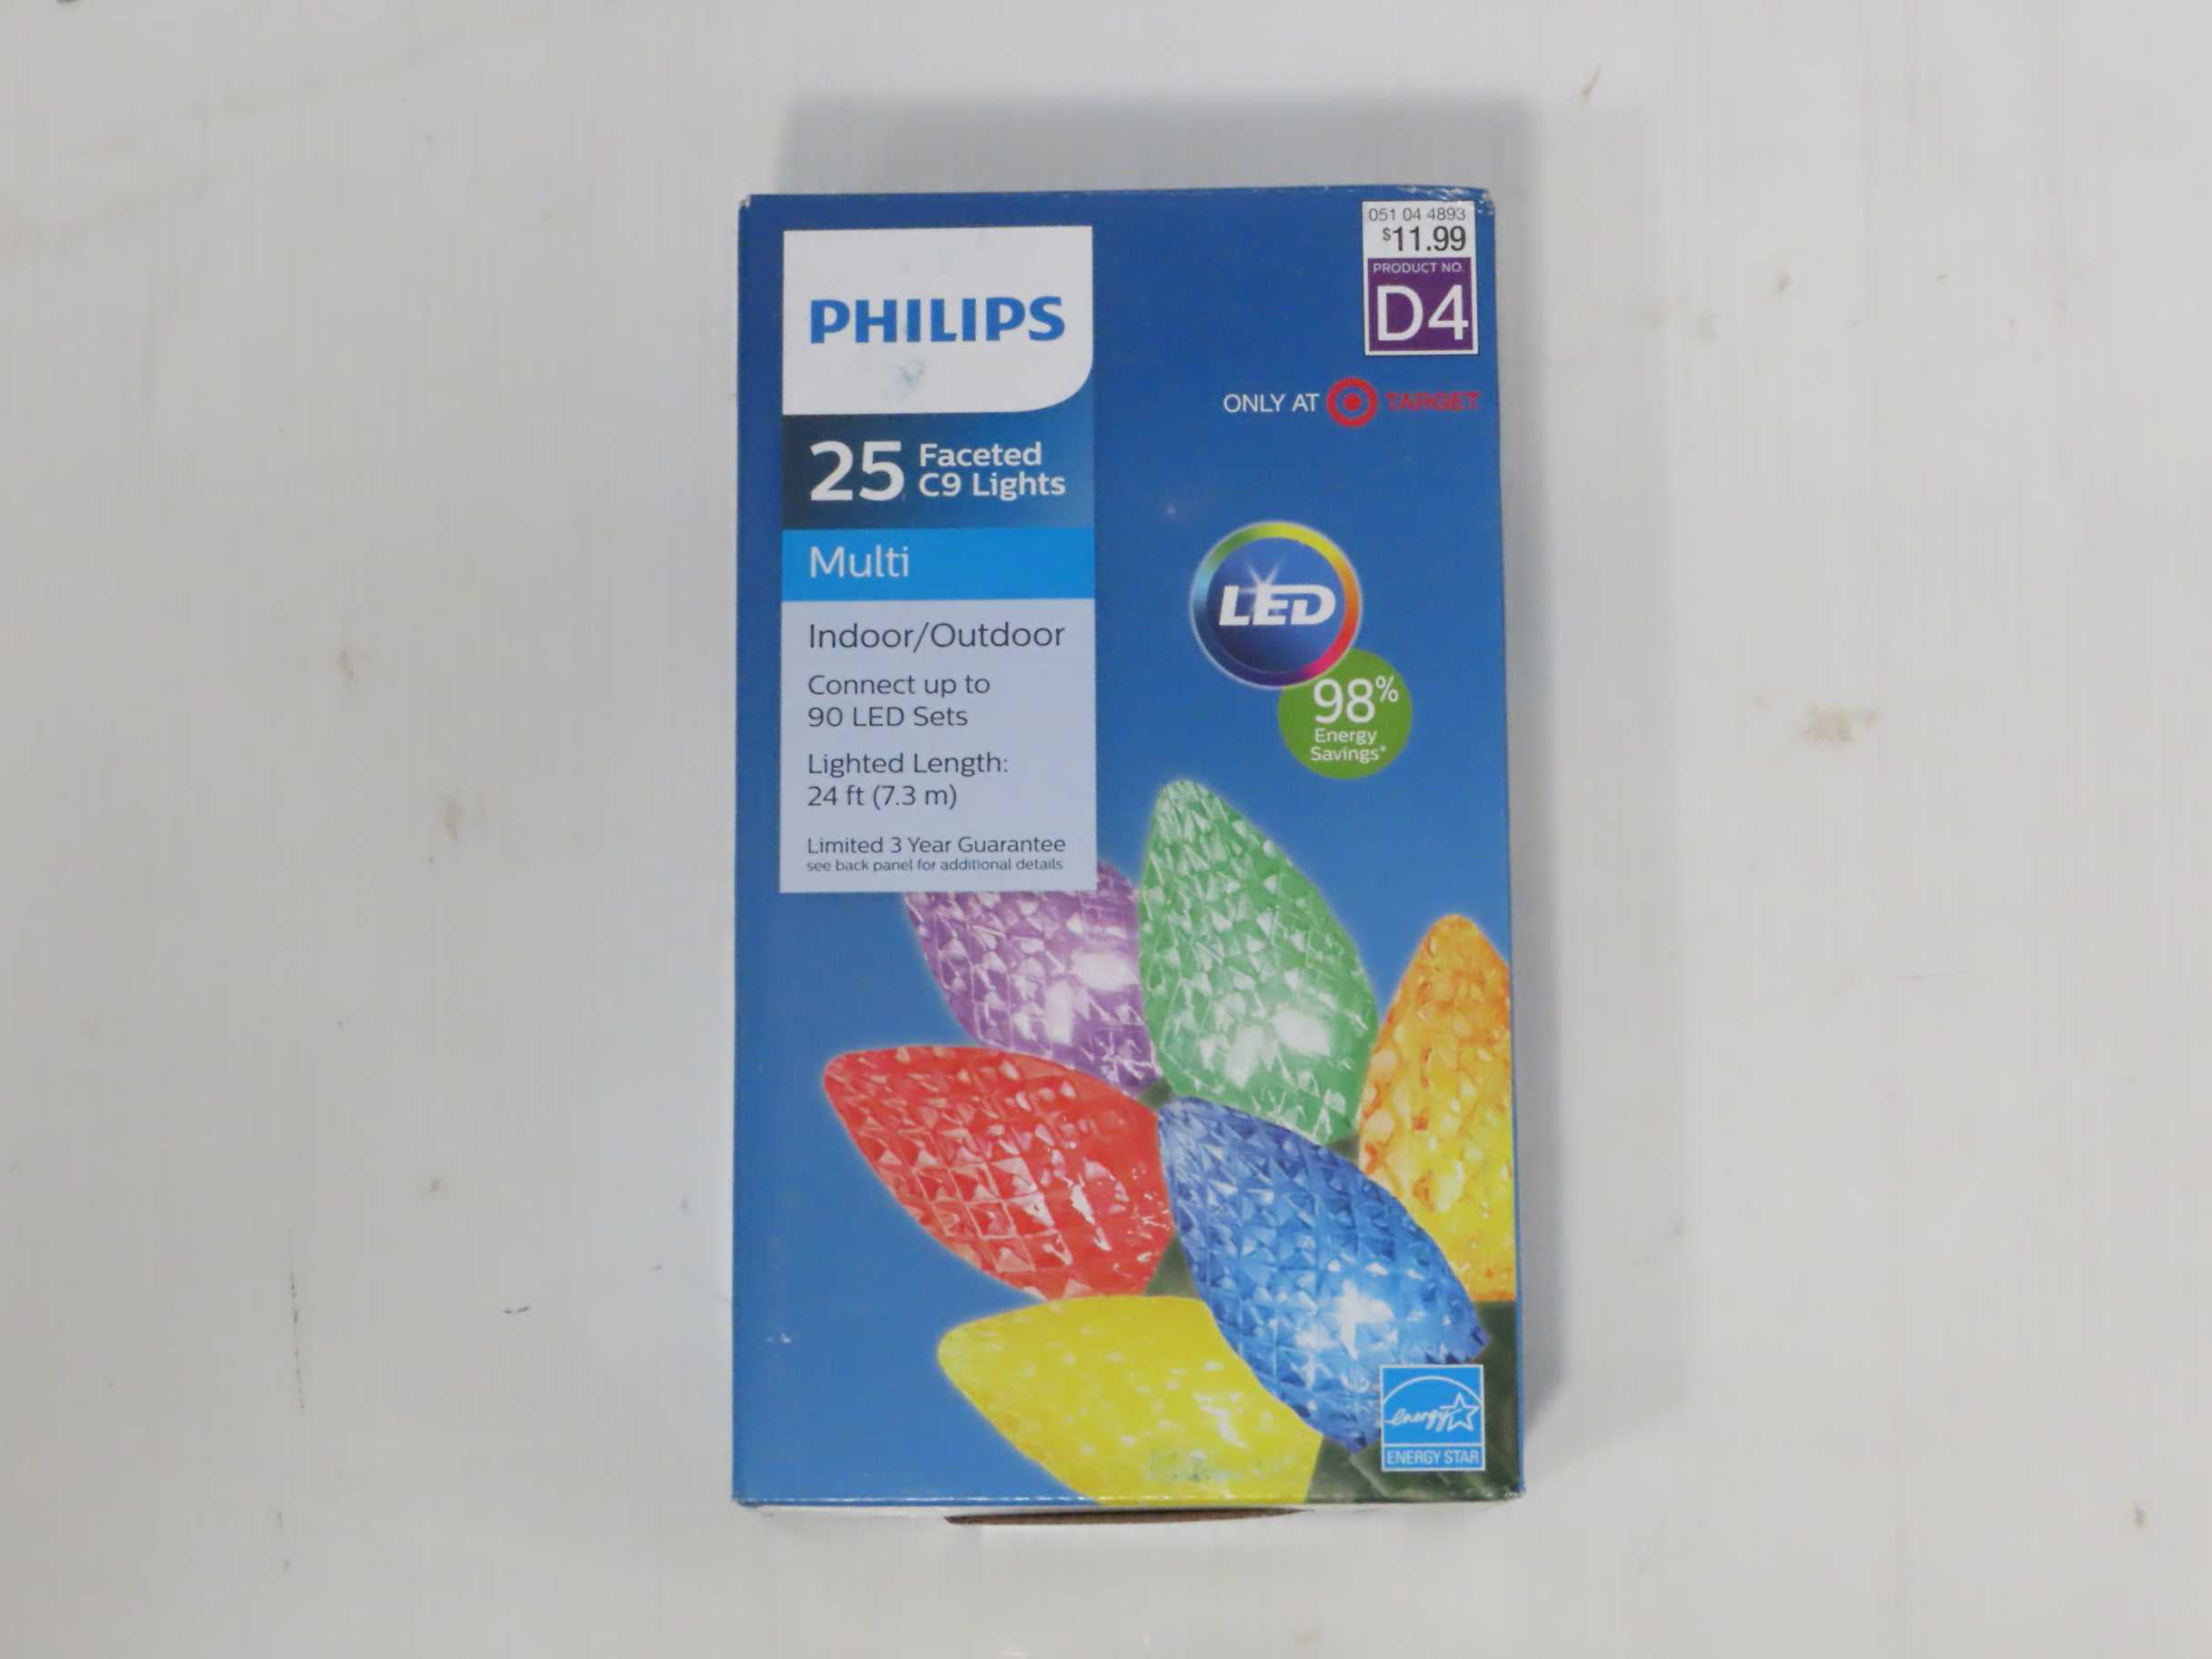 Philips Color Effect LED 25 C9 Faceted Cool White/Multi Color Changing Lights 